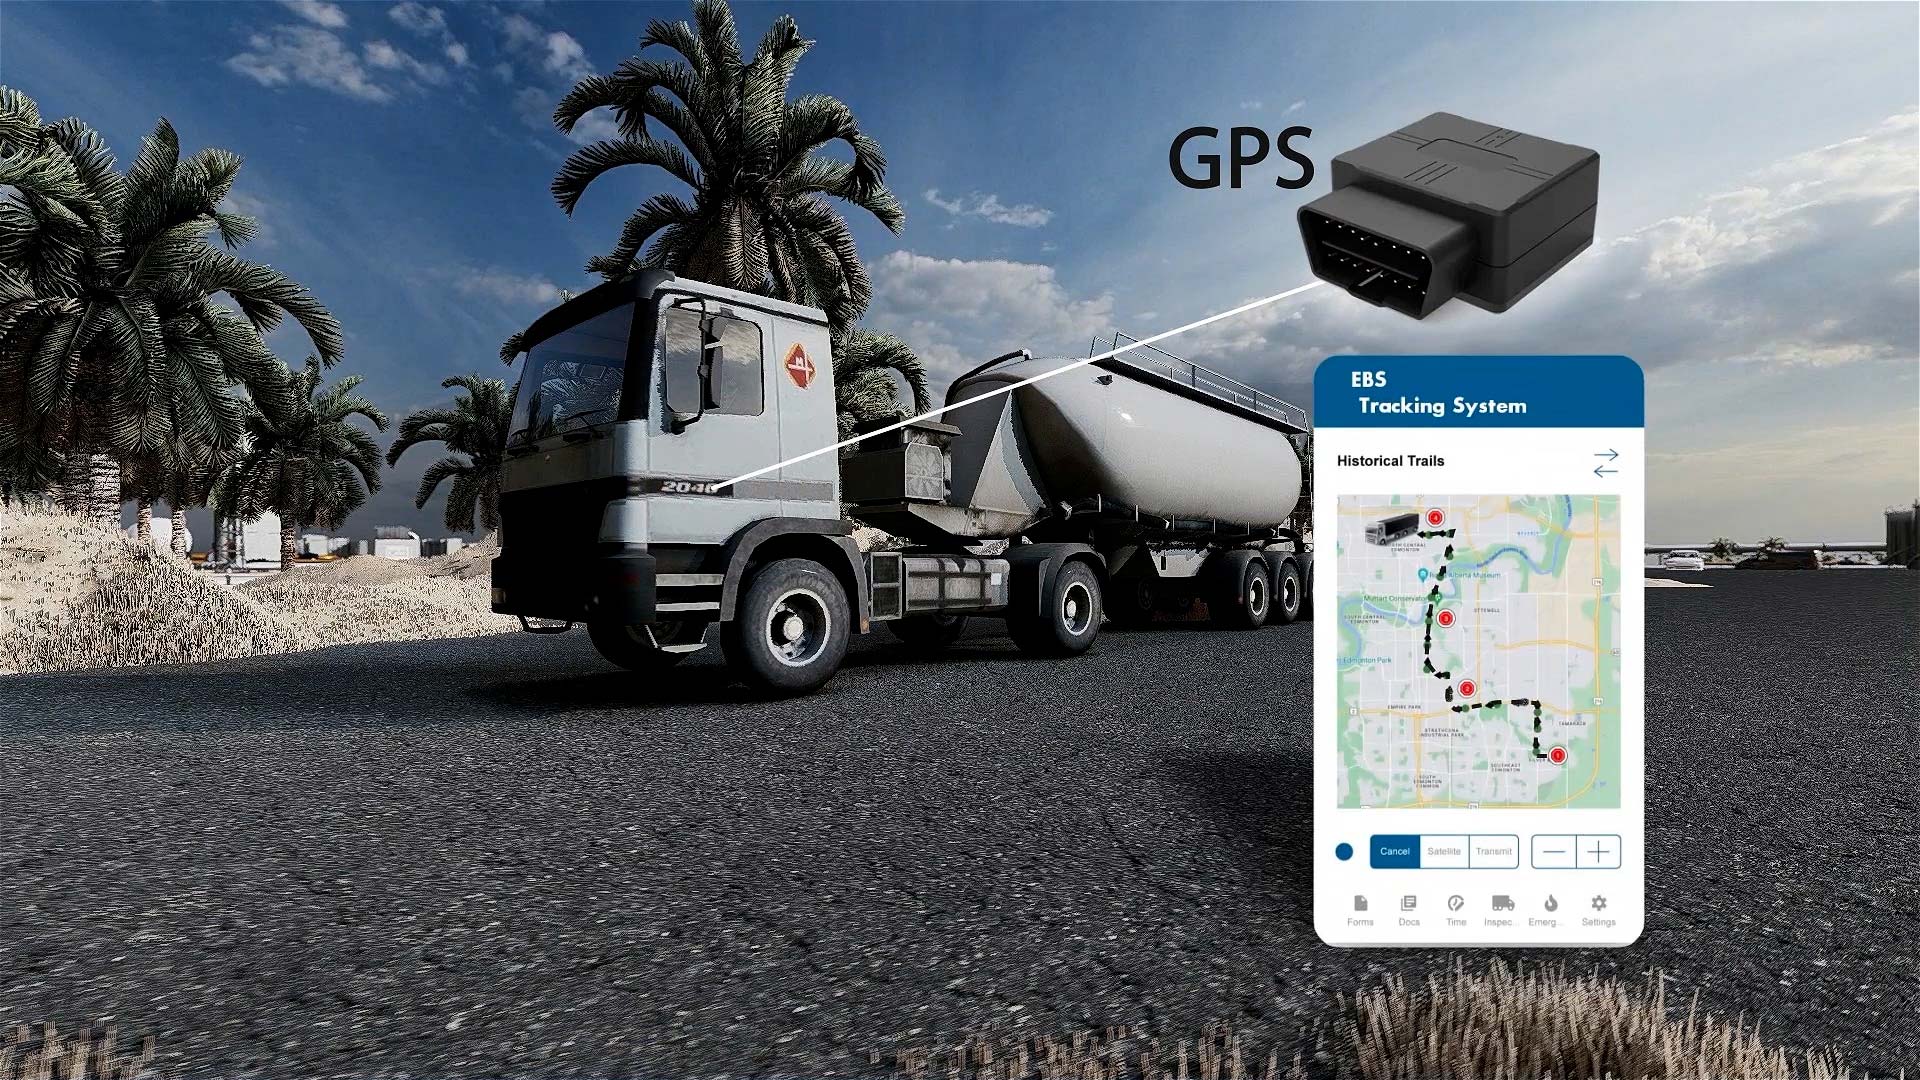 Truck with GPS tracking module (Electronic Barrel System)